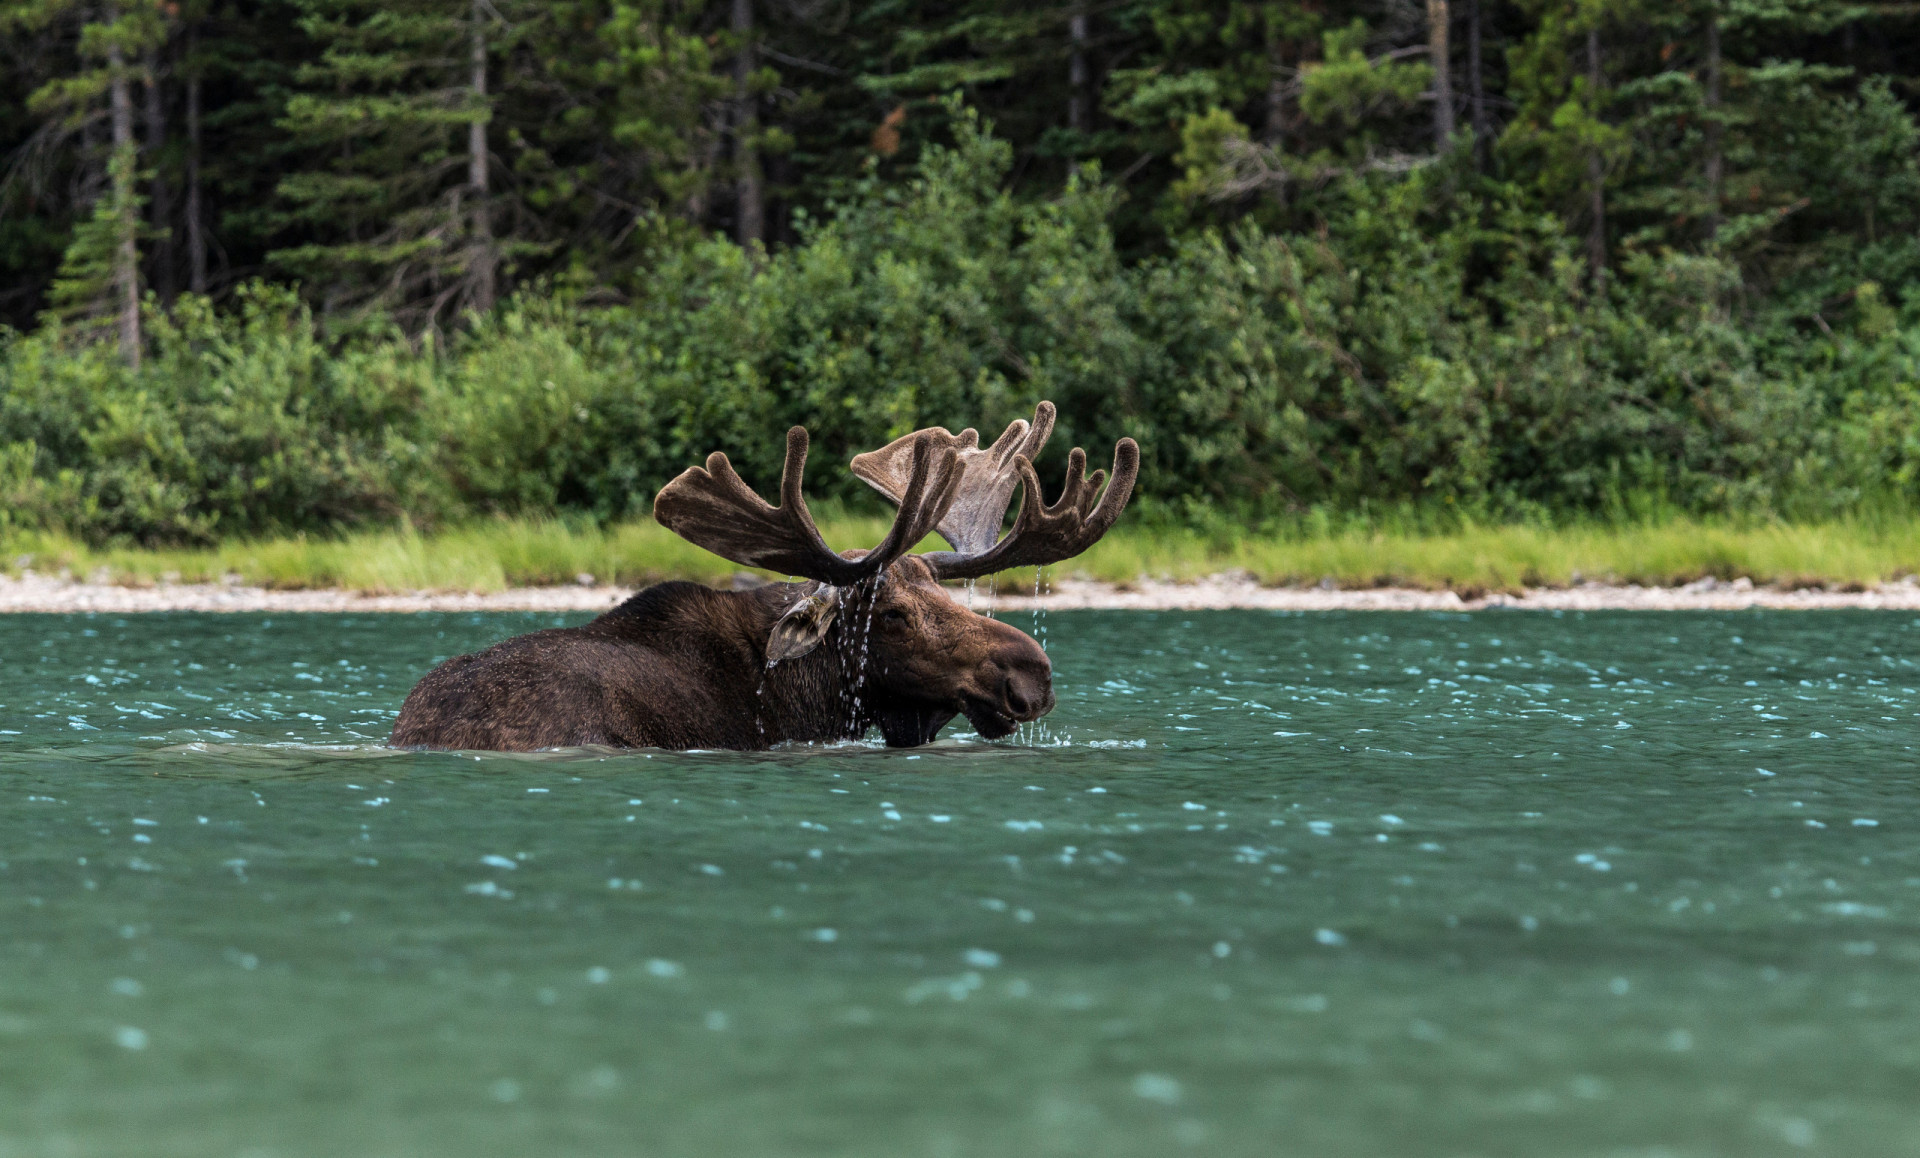 <p>Moose occupy a very different habitat to orcas and aren't even known prey for the killer whales, yet in the summer when they feed on aquatic vegetation, swimming between various islands along the coast of Canada and Alaska, there have been a few cases recorded of orcas attacking them.</p><p><a href="https://www.msn.com/en-us/community/channel/vid-7xx8mnucu55yw63we9va2gwr7uihbxwc68fxqp25x6tg4ftibpra?cvid=94631541bc0f4f89bfd59158d696ad7e">Follow us and access great exclusive content every day</a></p>